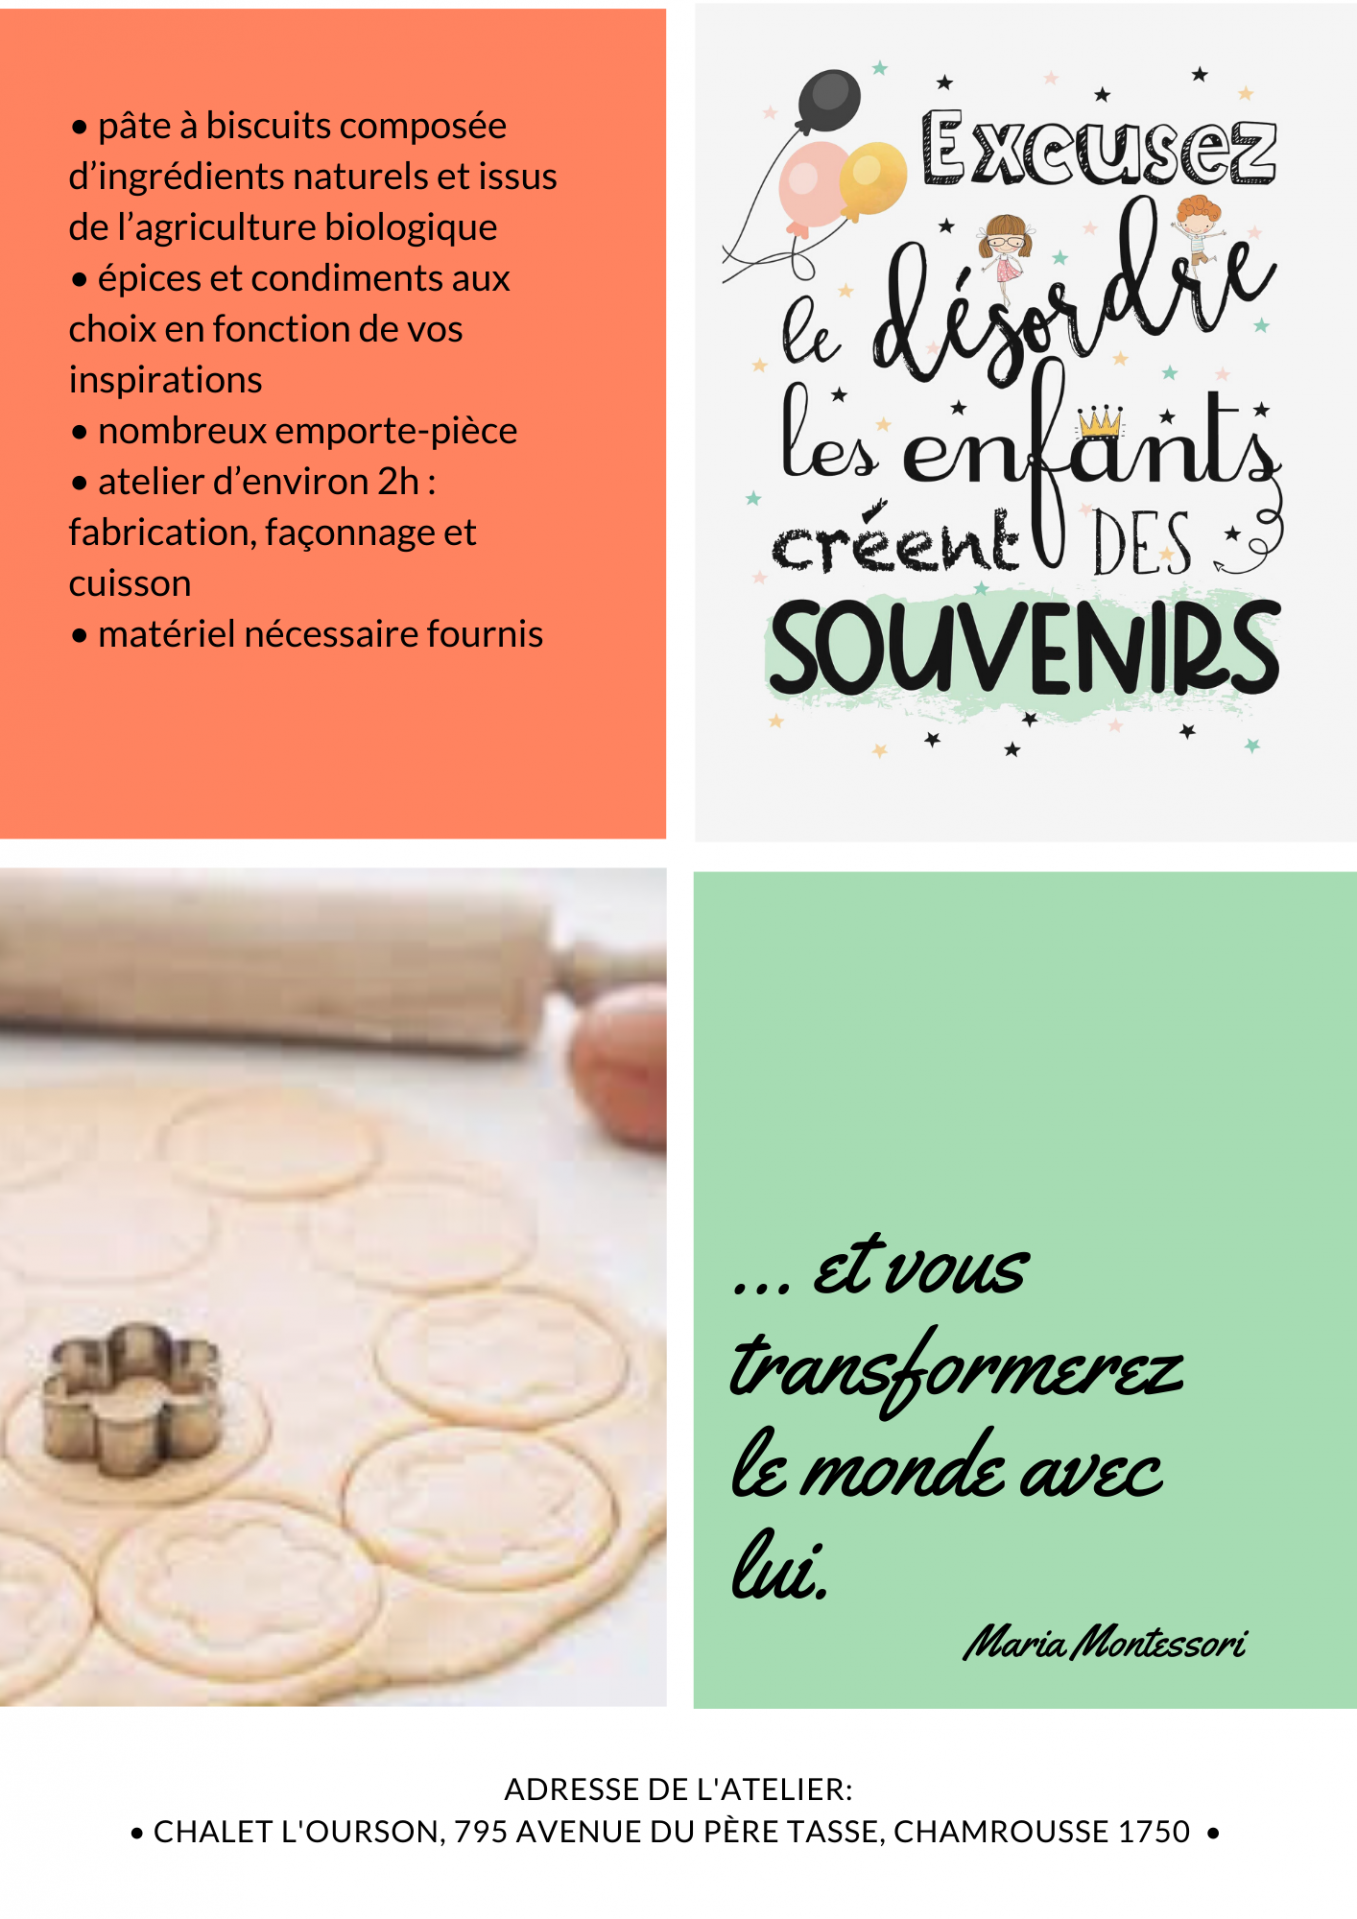 Atelier de fabrication biscuits Chamrousse